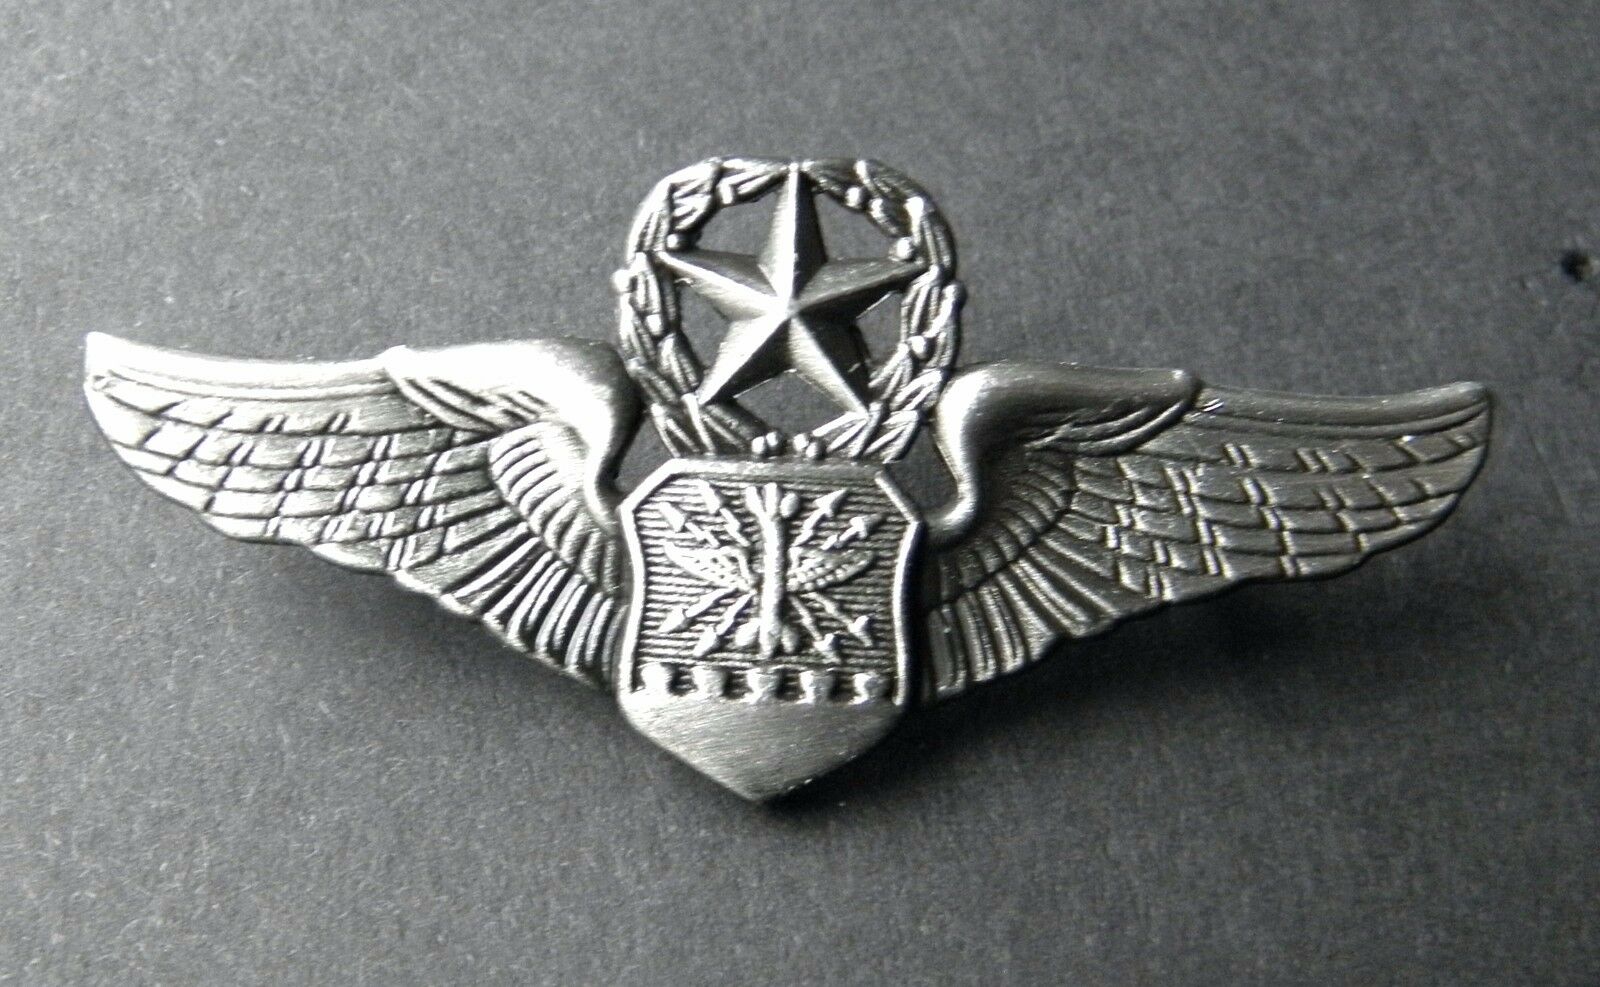 US AIR FORCE OFFICER BASIC AIRCREW WINGS LAPEL JACKET PIN BADGE 3 INCHES